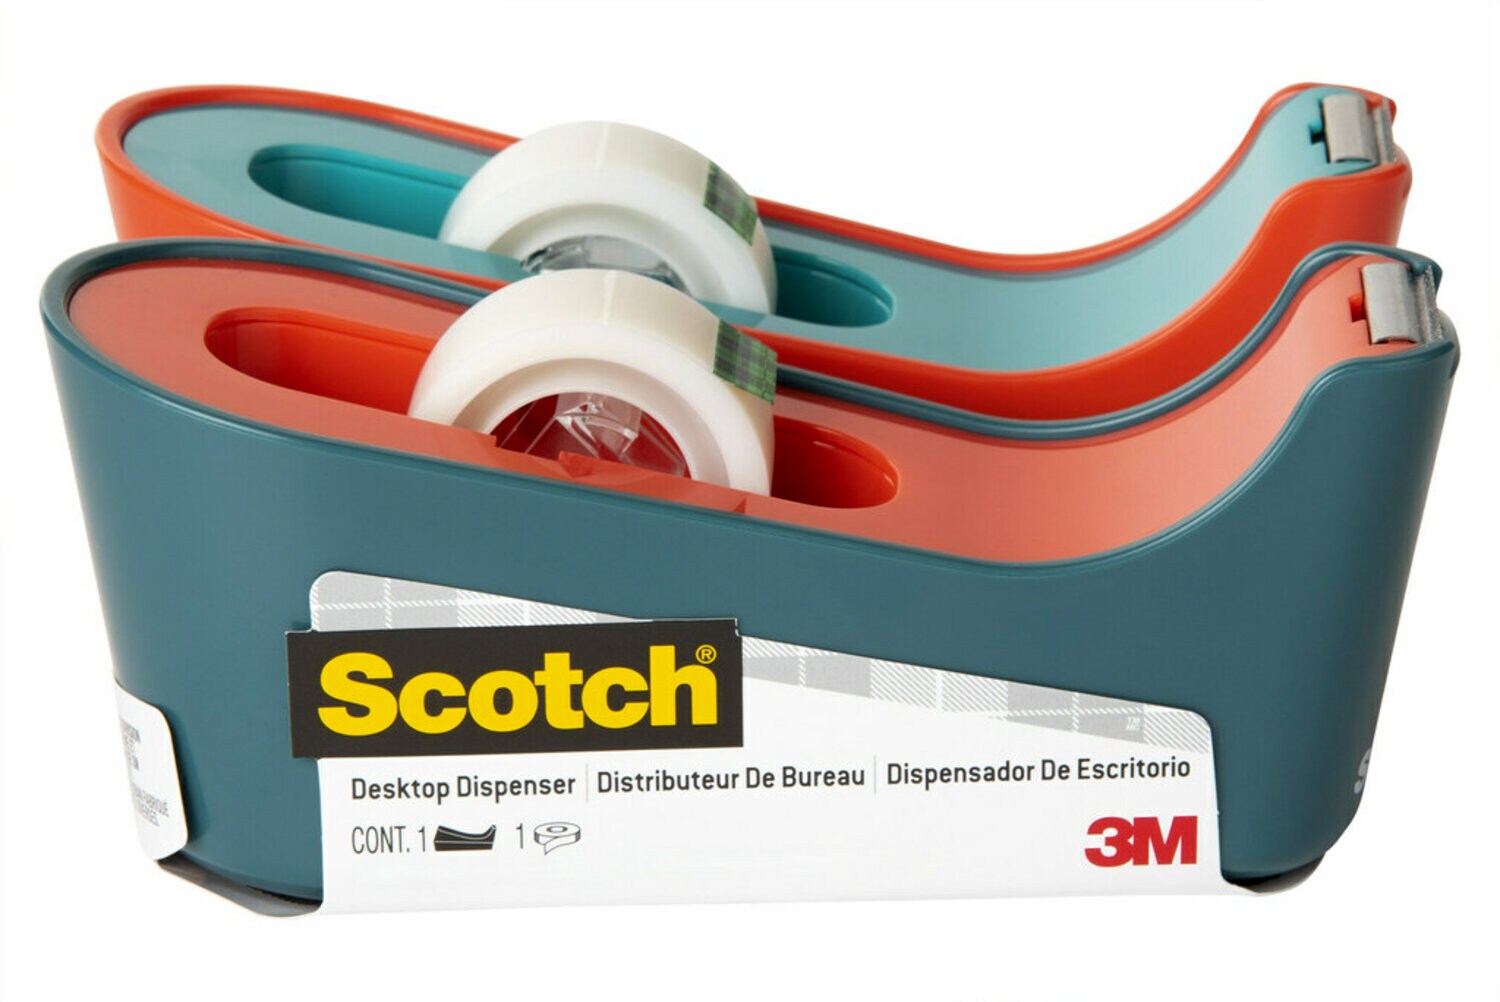 7100226092 - Scotch Tape Dispenser C18-MX, Two Color Combinations, 0.75 in x 350 in (19 mm x 8.89 m), Roll of Tape Included